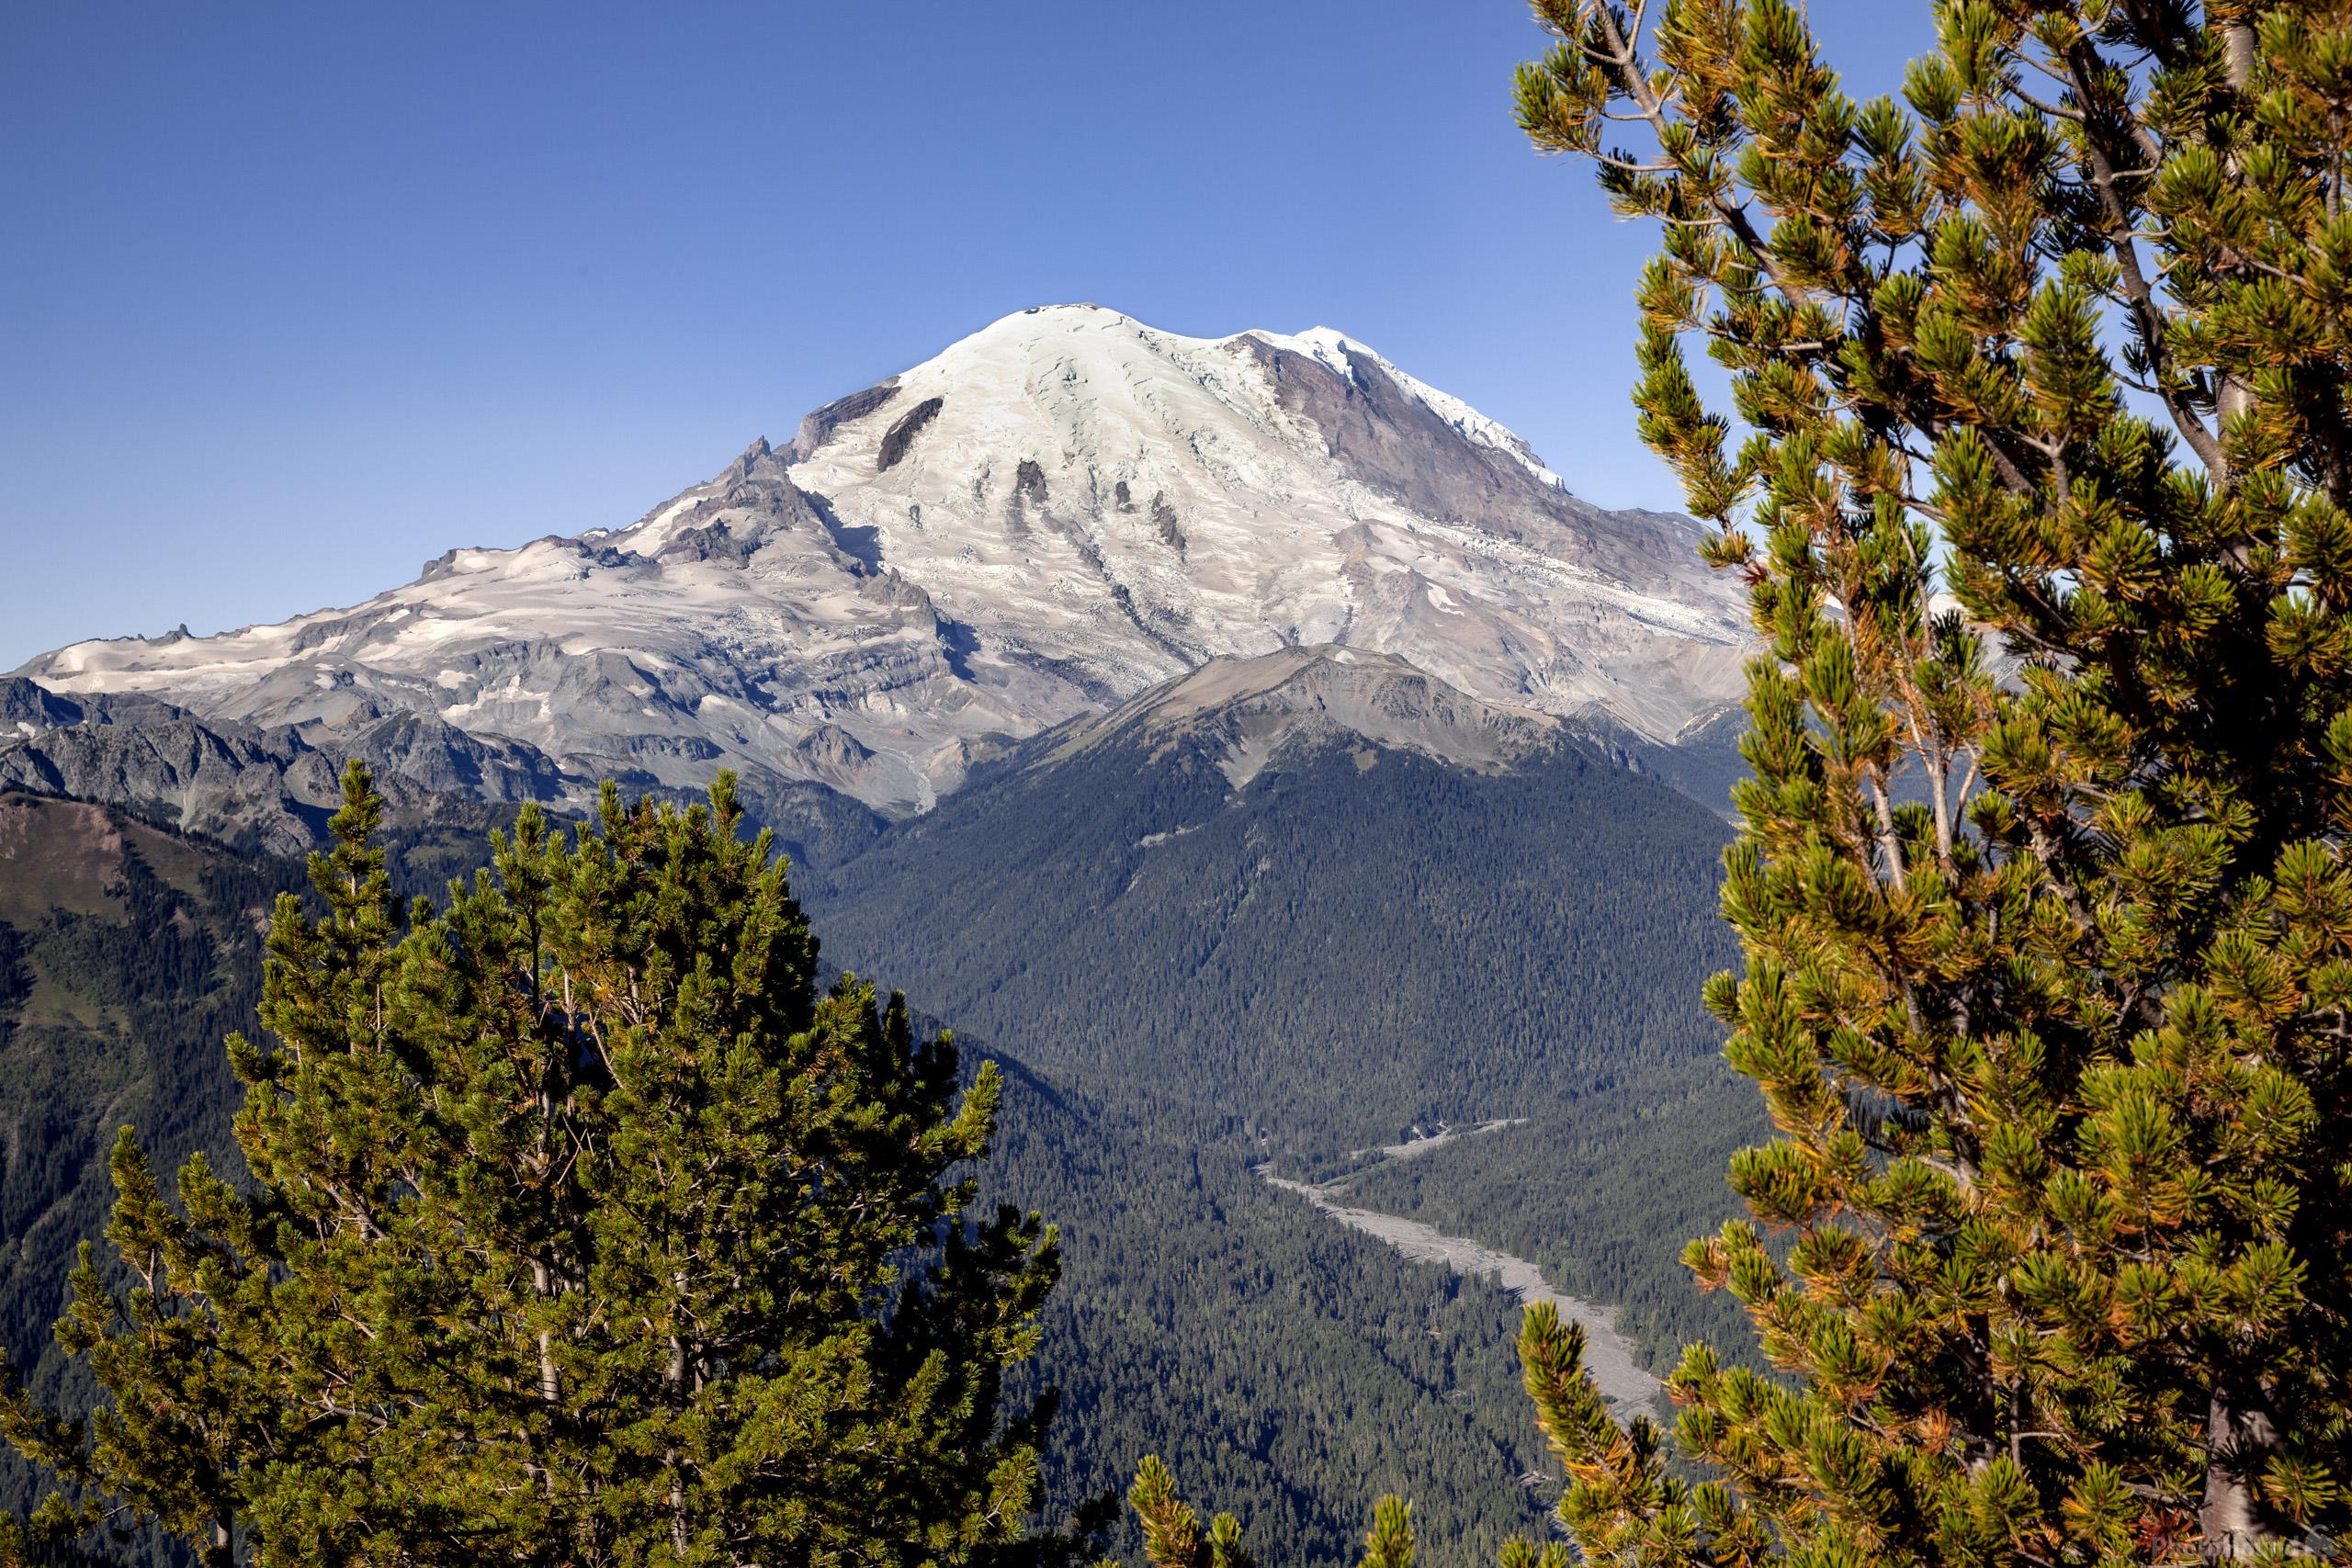 Image of Crystal Peak, Mount Rainier National Park by T. Kirkendall and V. Spring